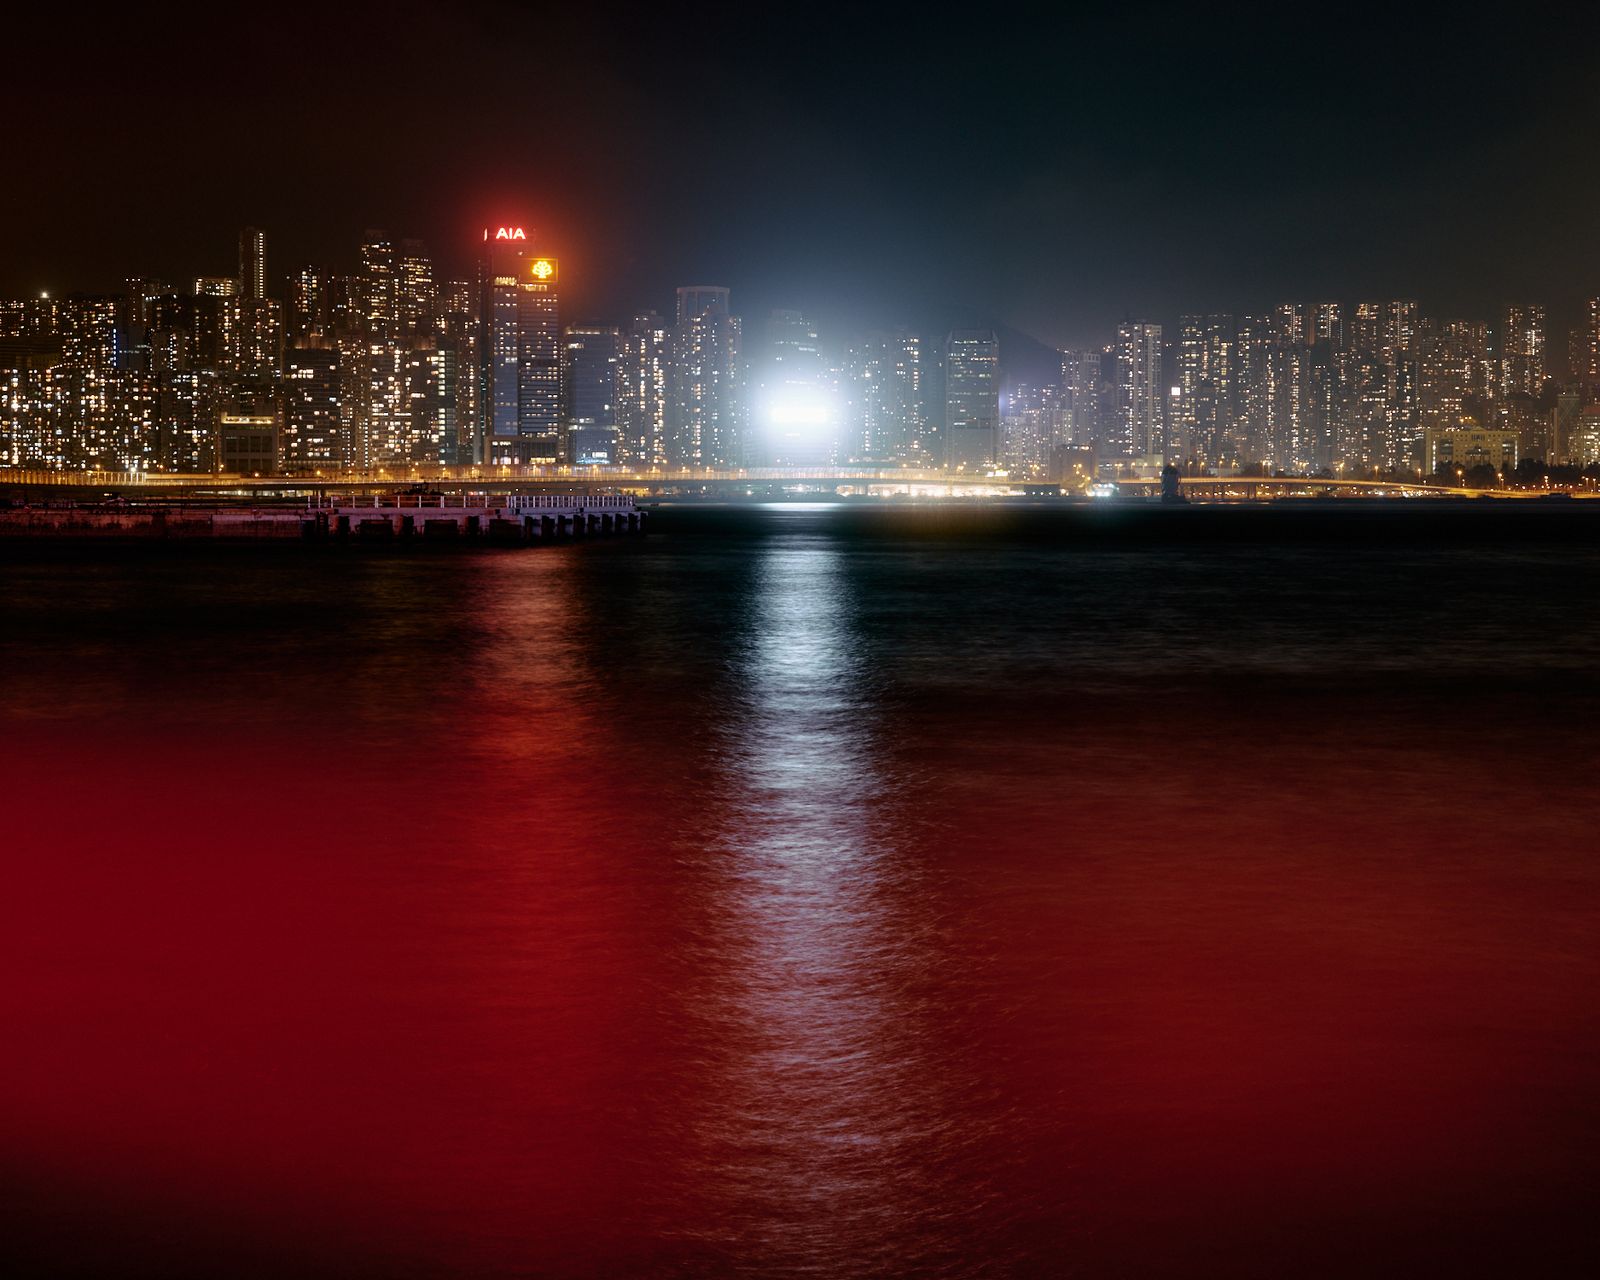 © Chung-wai Wong - Victoria Harbour, looking at the Hong Kong Island from the Kowloon side.